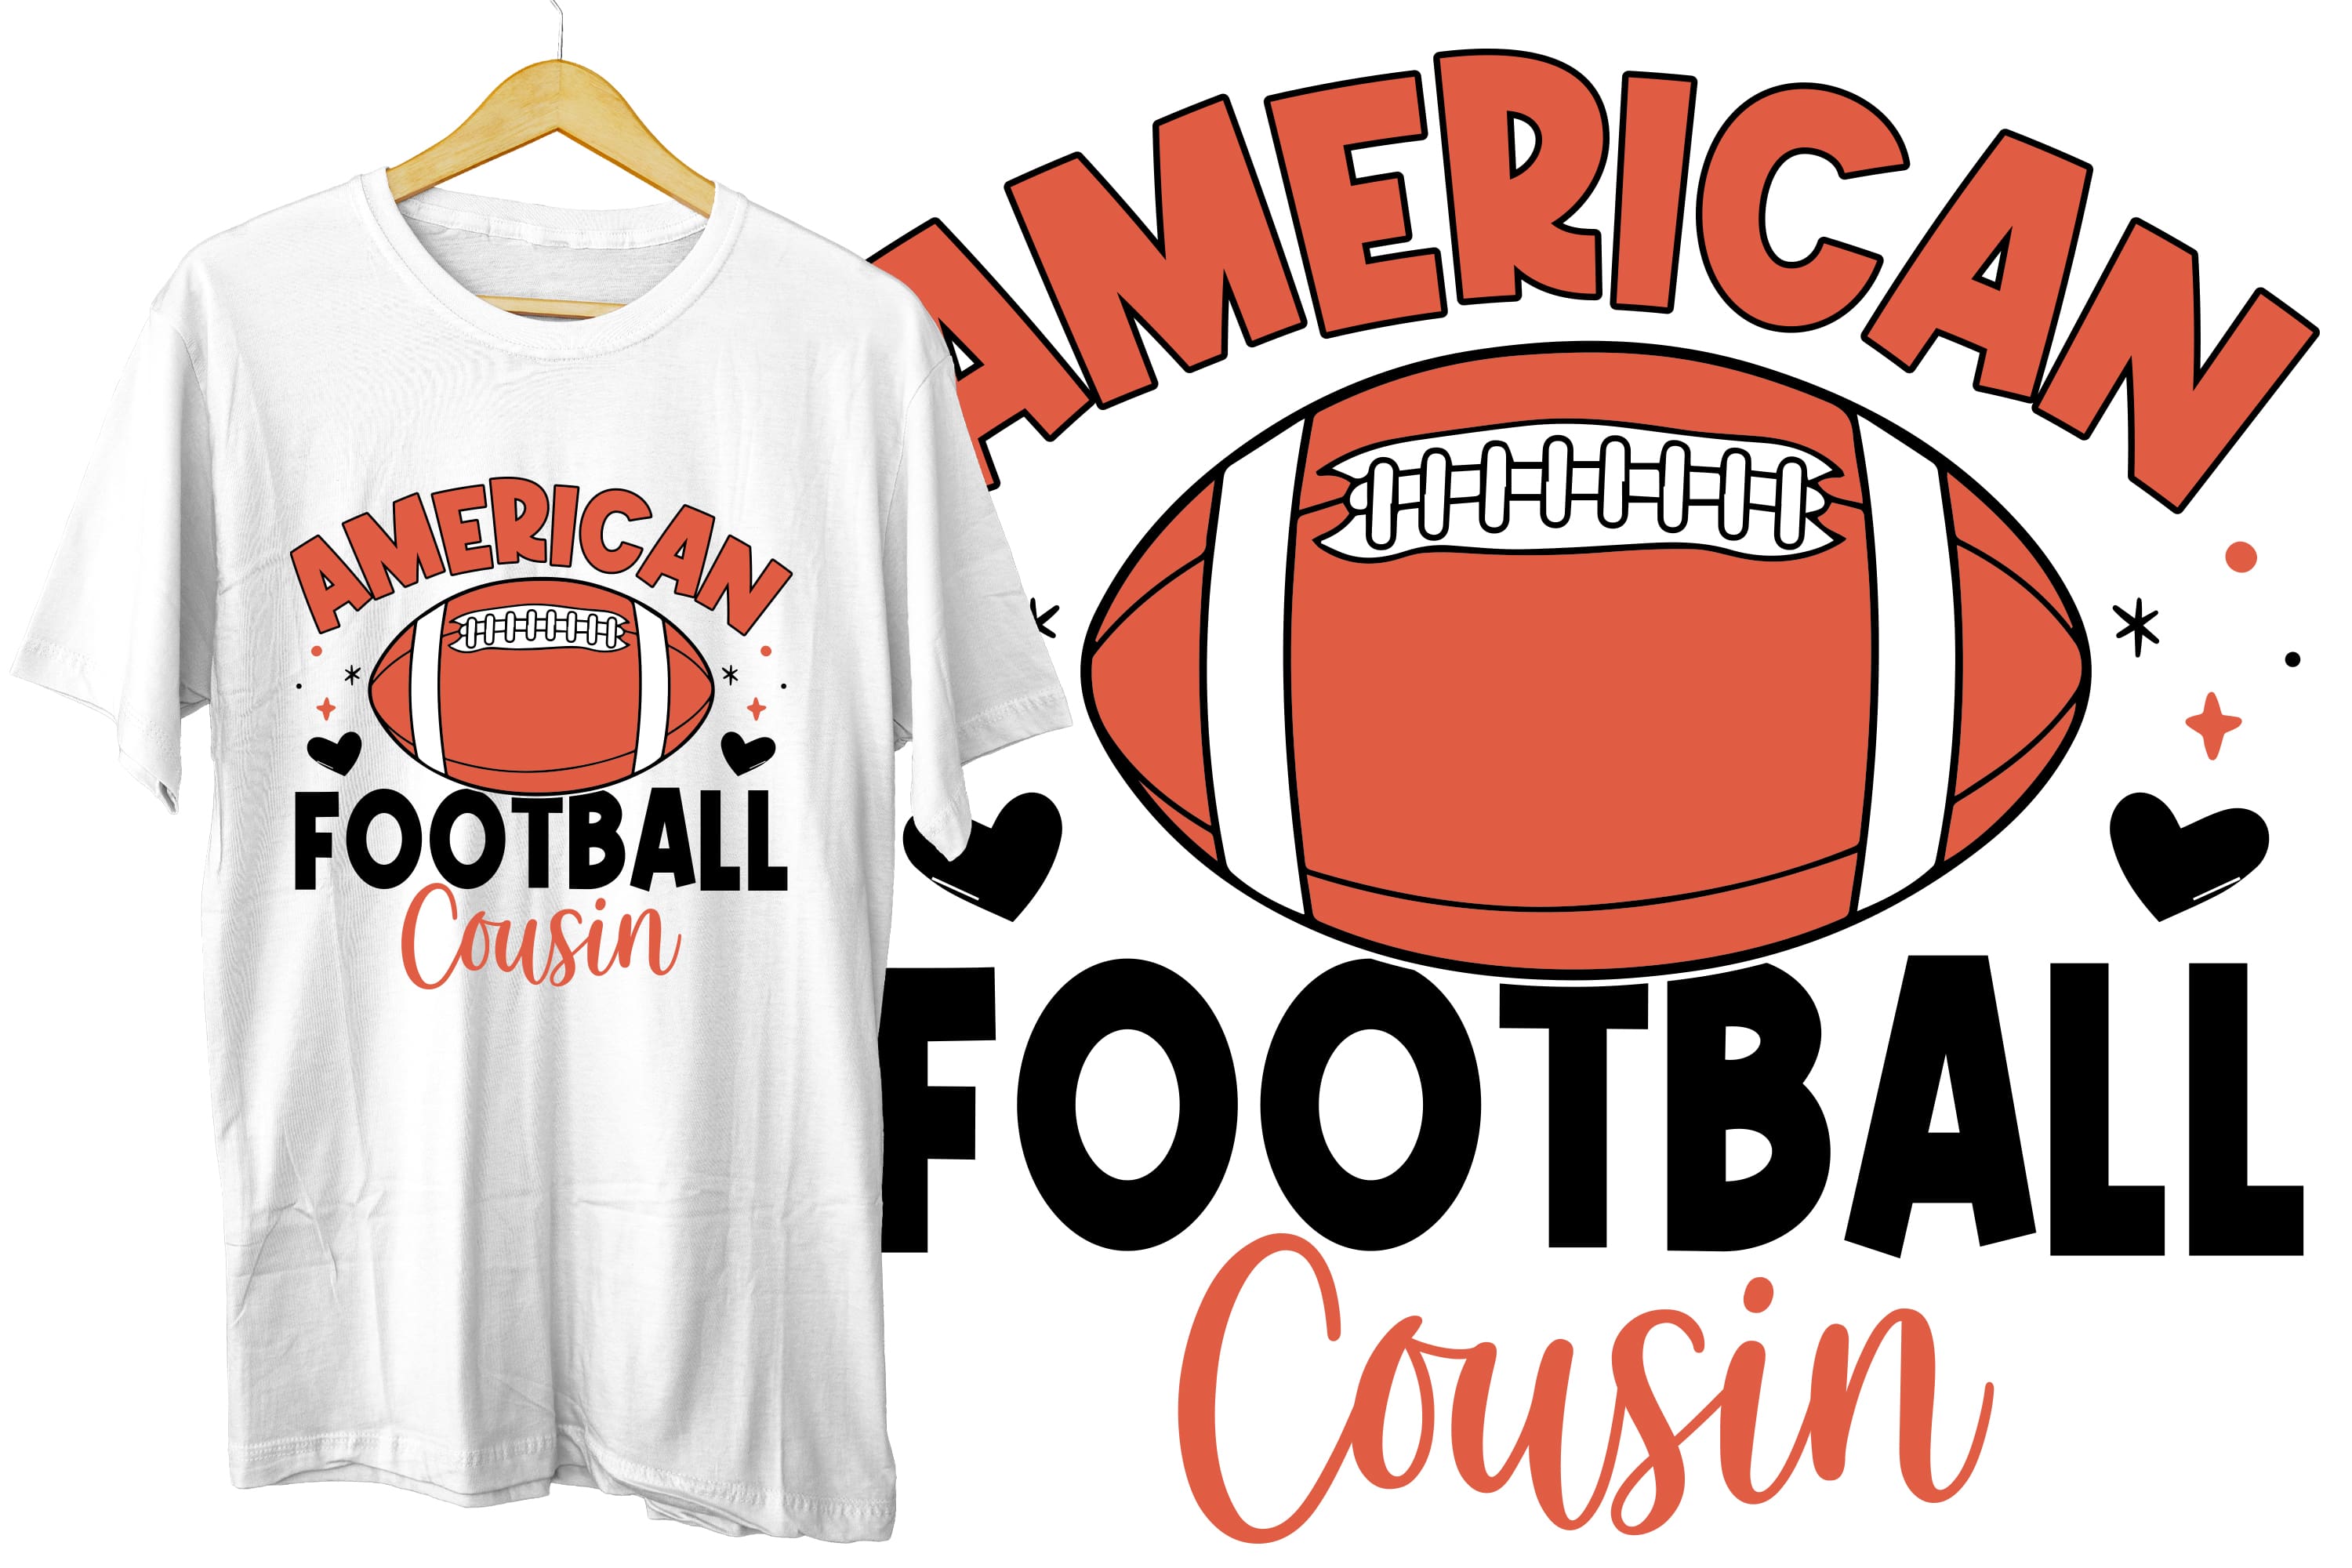 American football cousin t - shirt with the words american football cous.